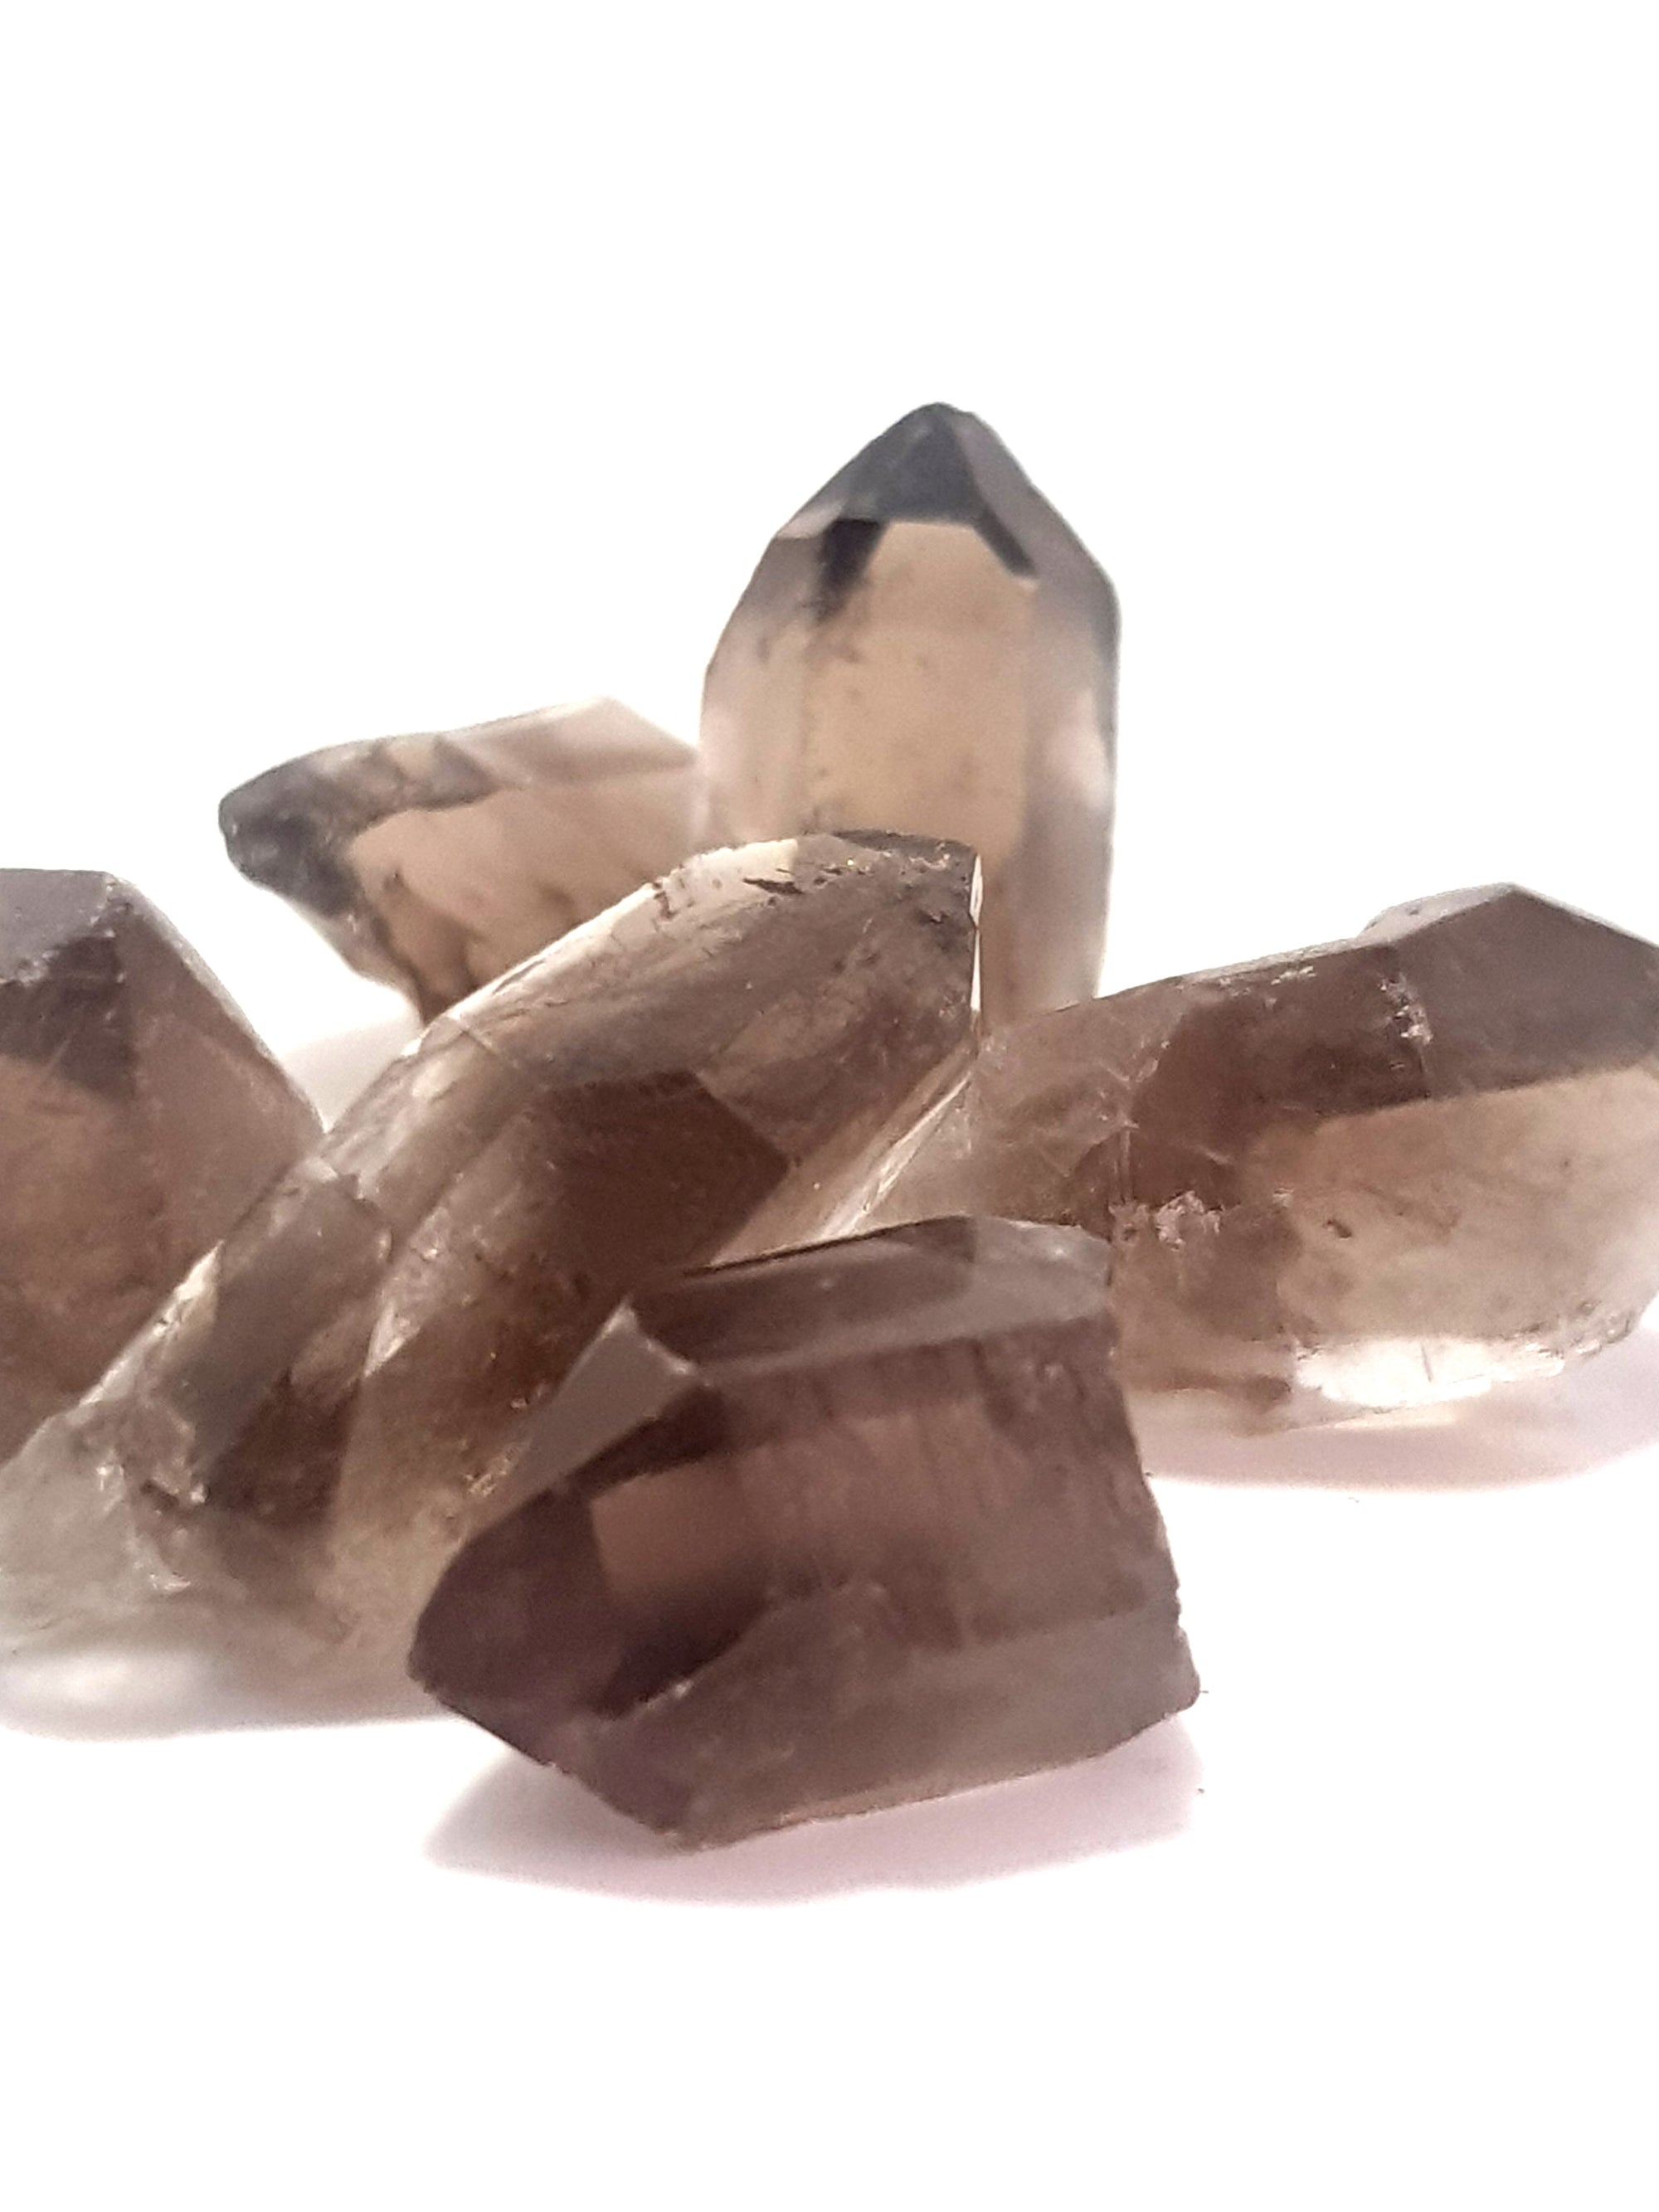 six natural points of smoky quartz. the crystals are well formed. the colour is dark. They are translucent